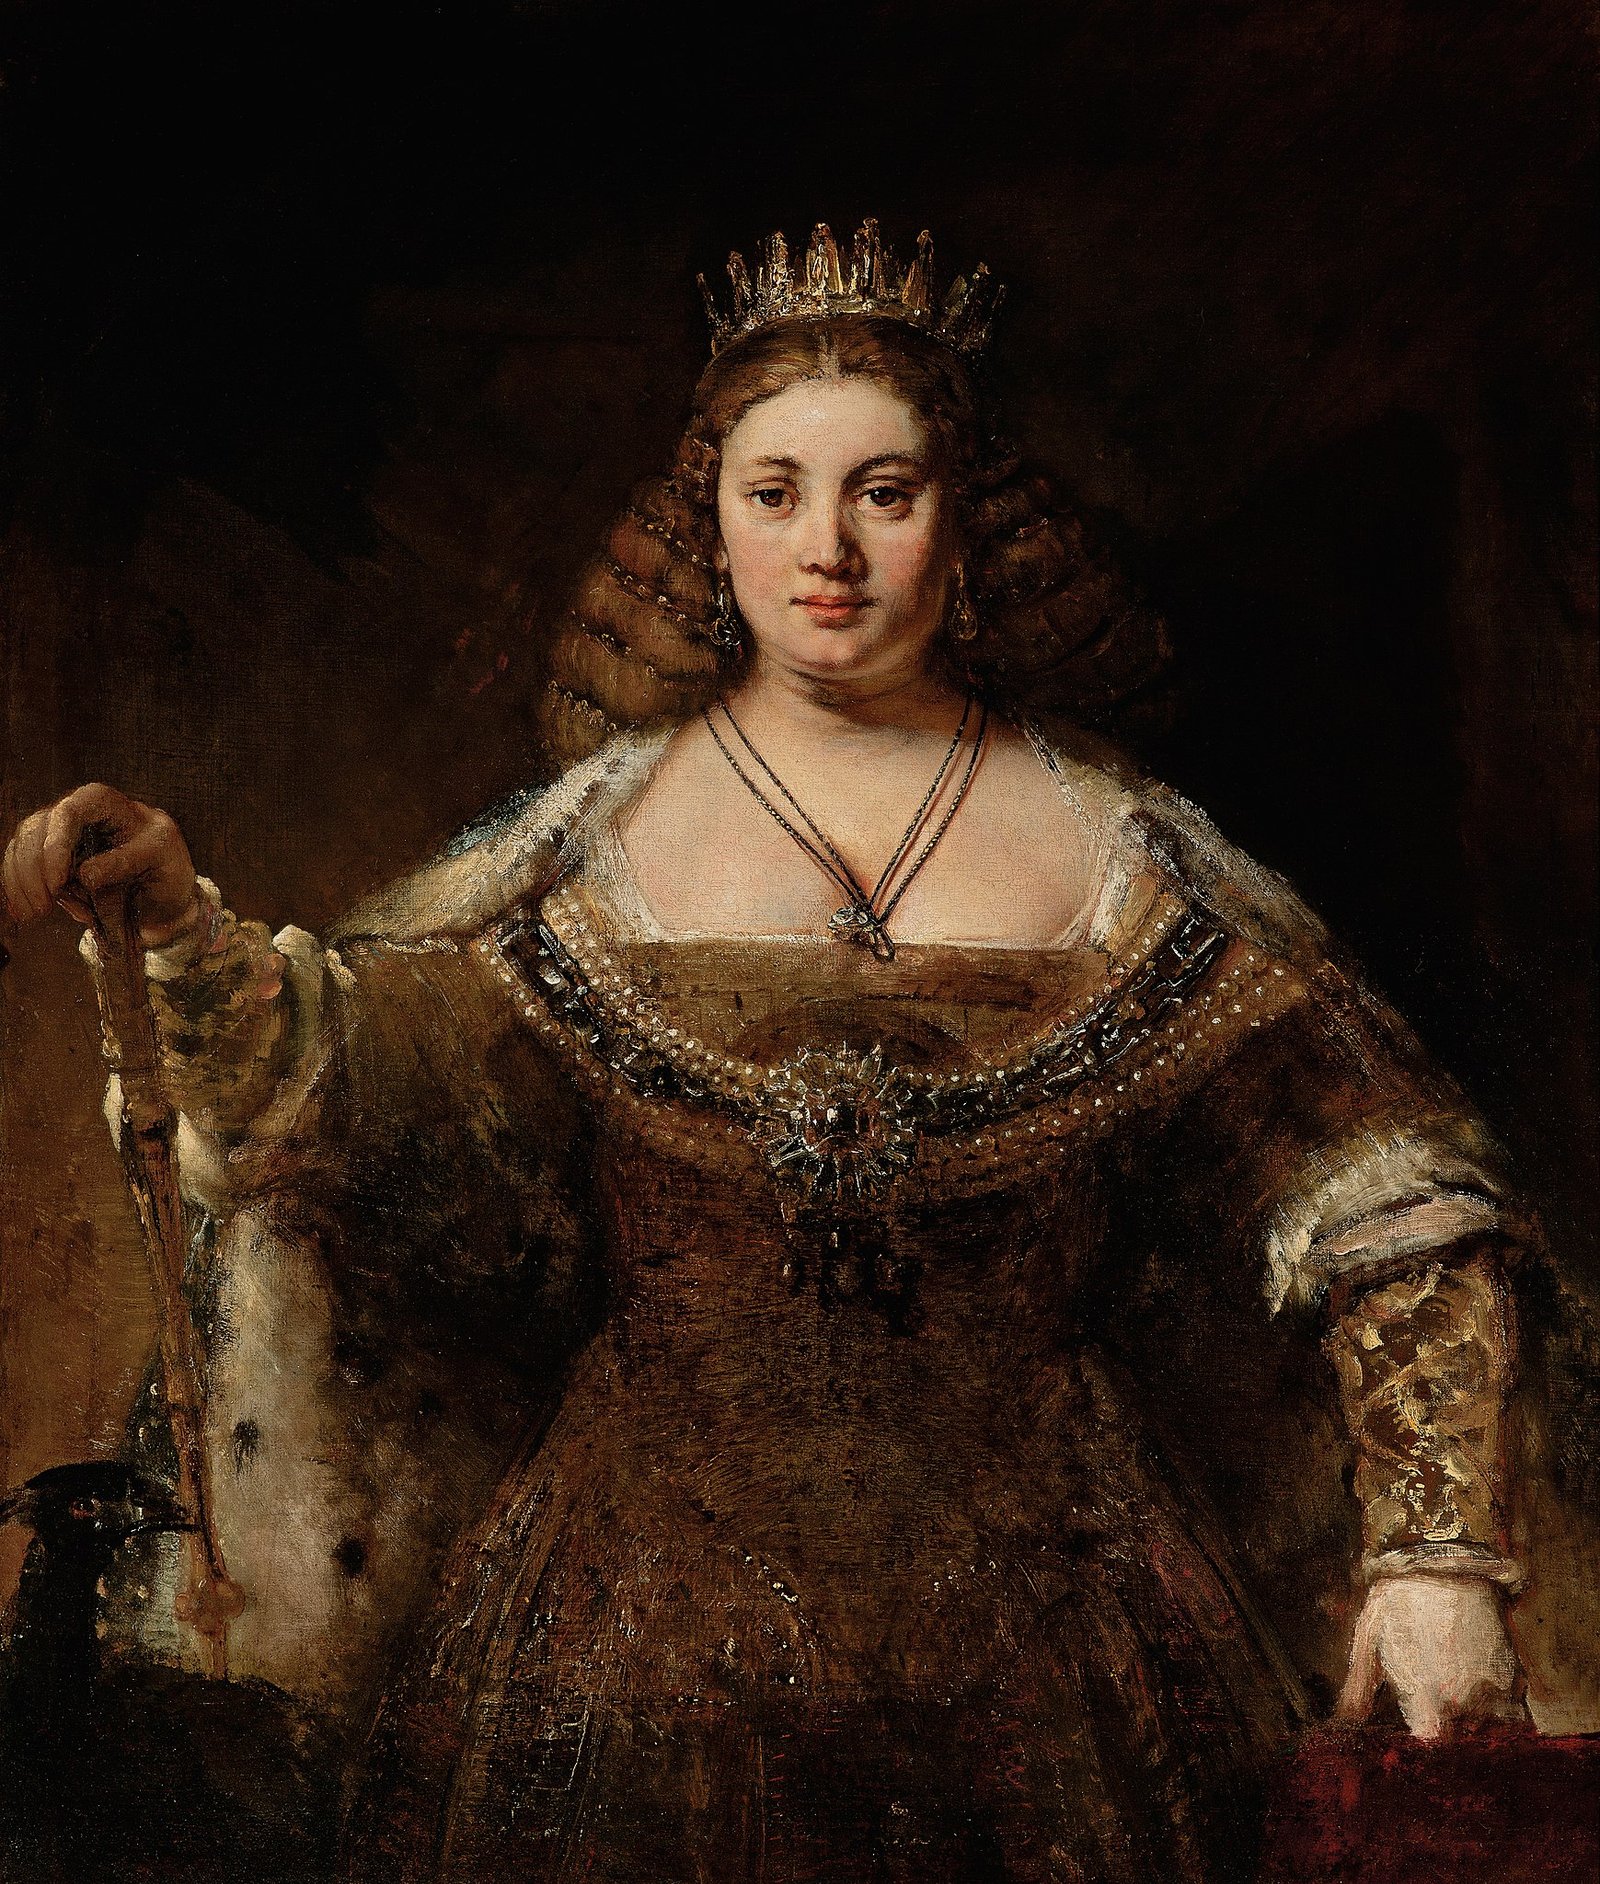 This painting represents Hera as a middle-aged and unfit queen.